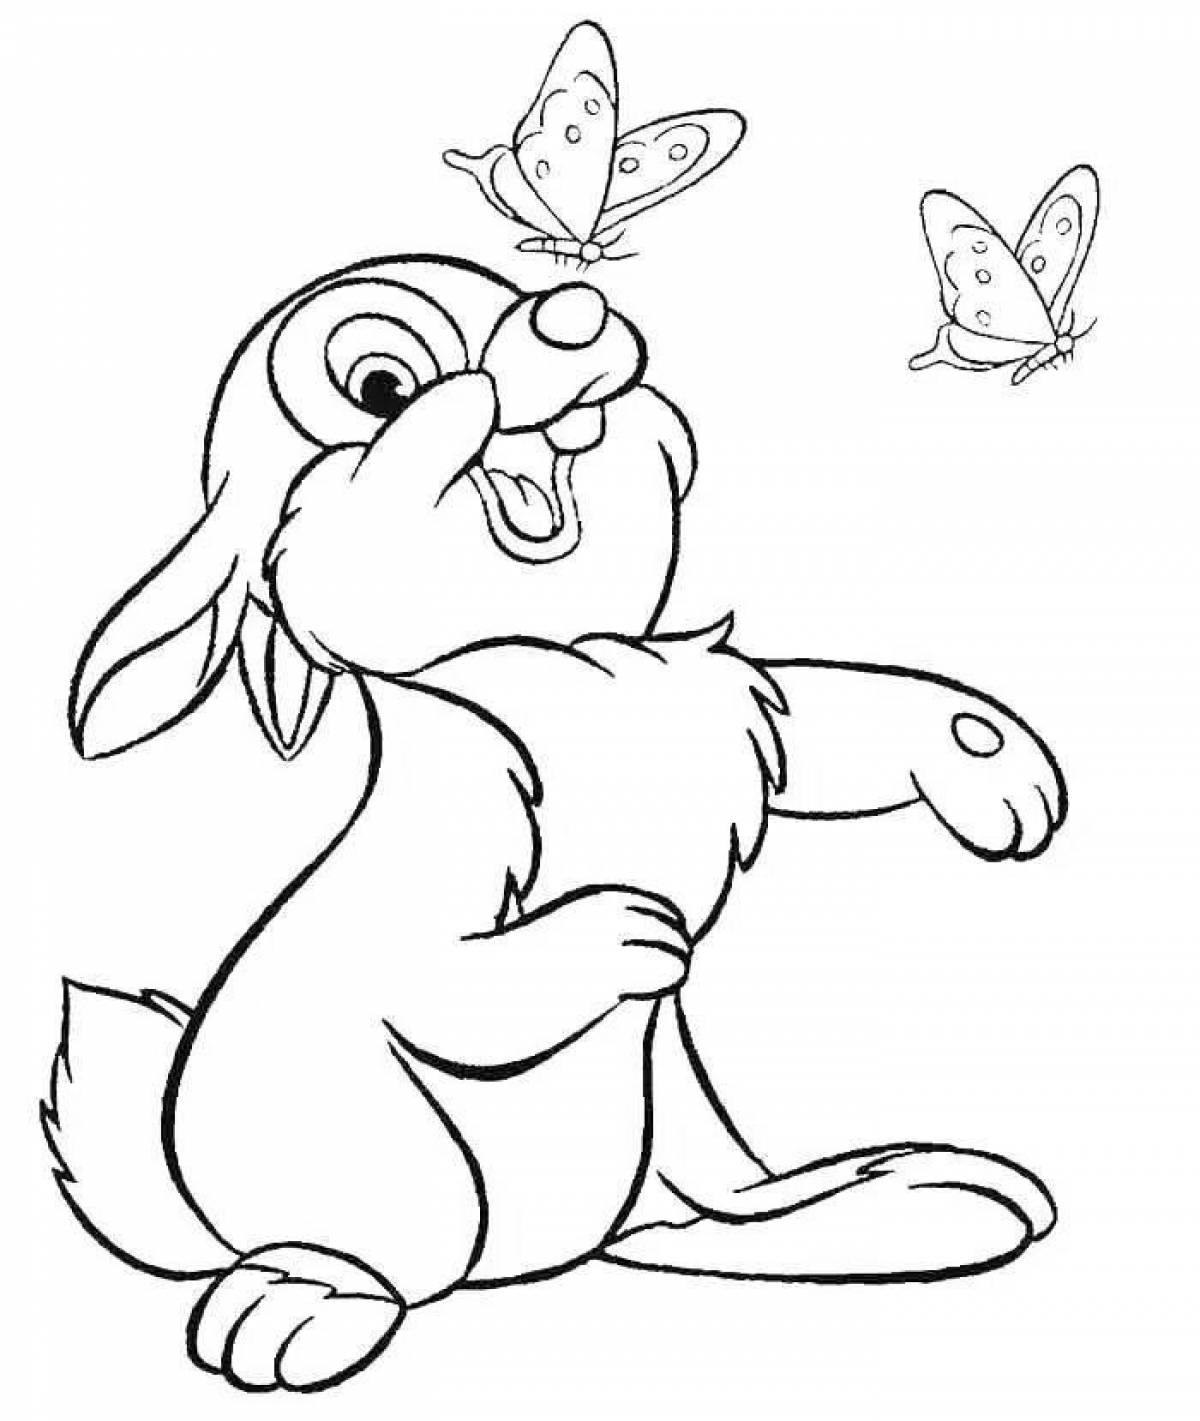 Drawing of a cheerful hare